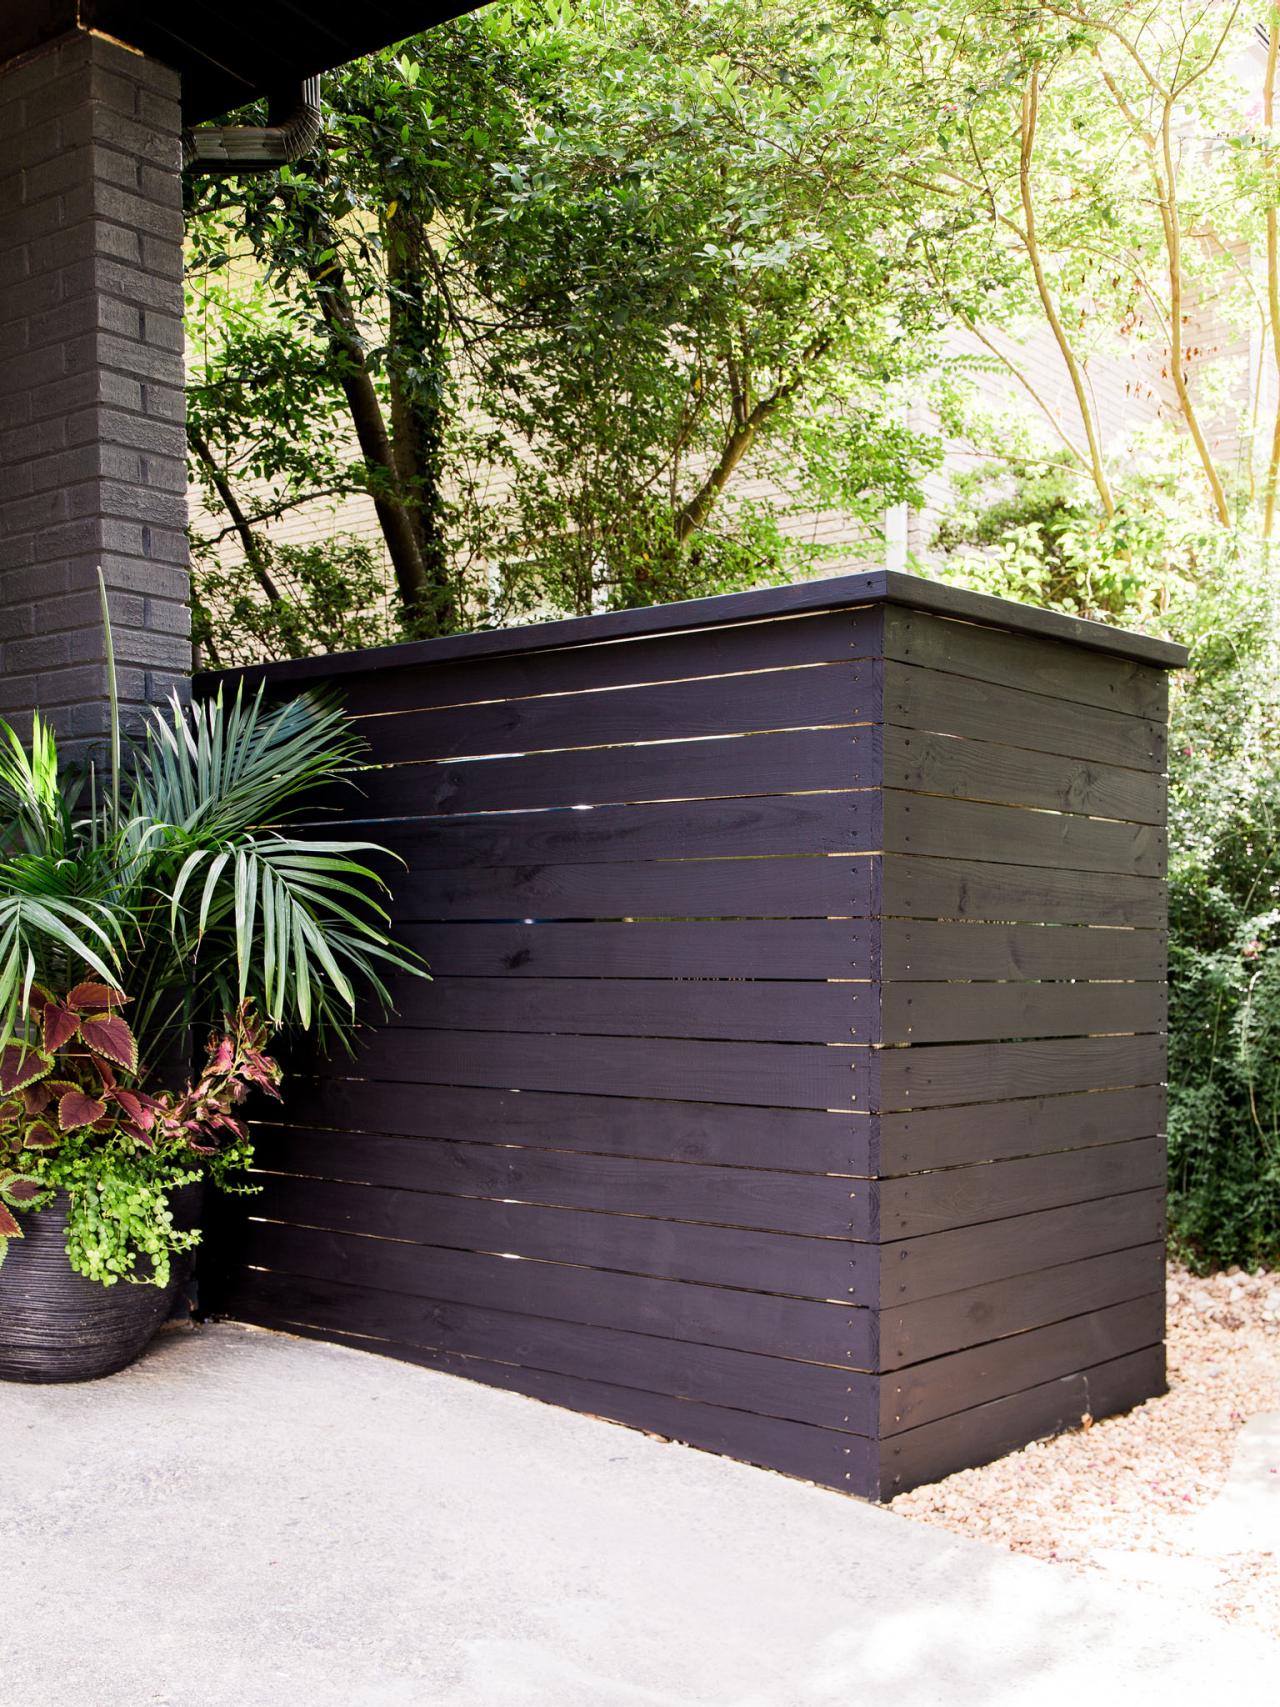 How To Build A Garbage Can Screen, Diy Outdoor Garbage Can Cabinet